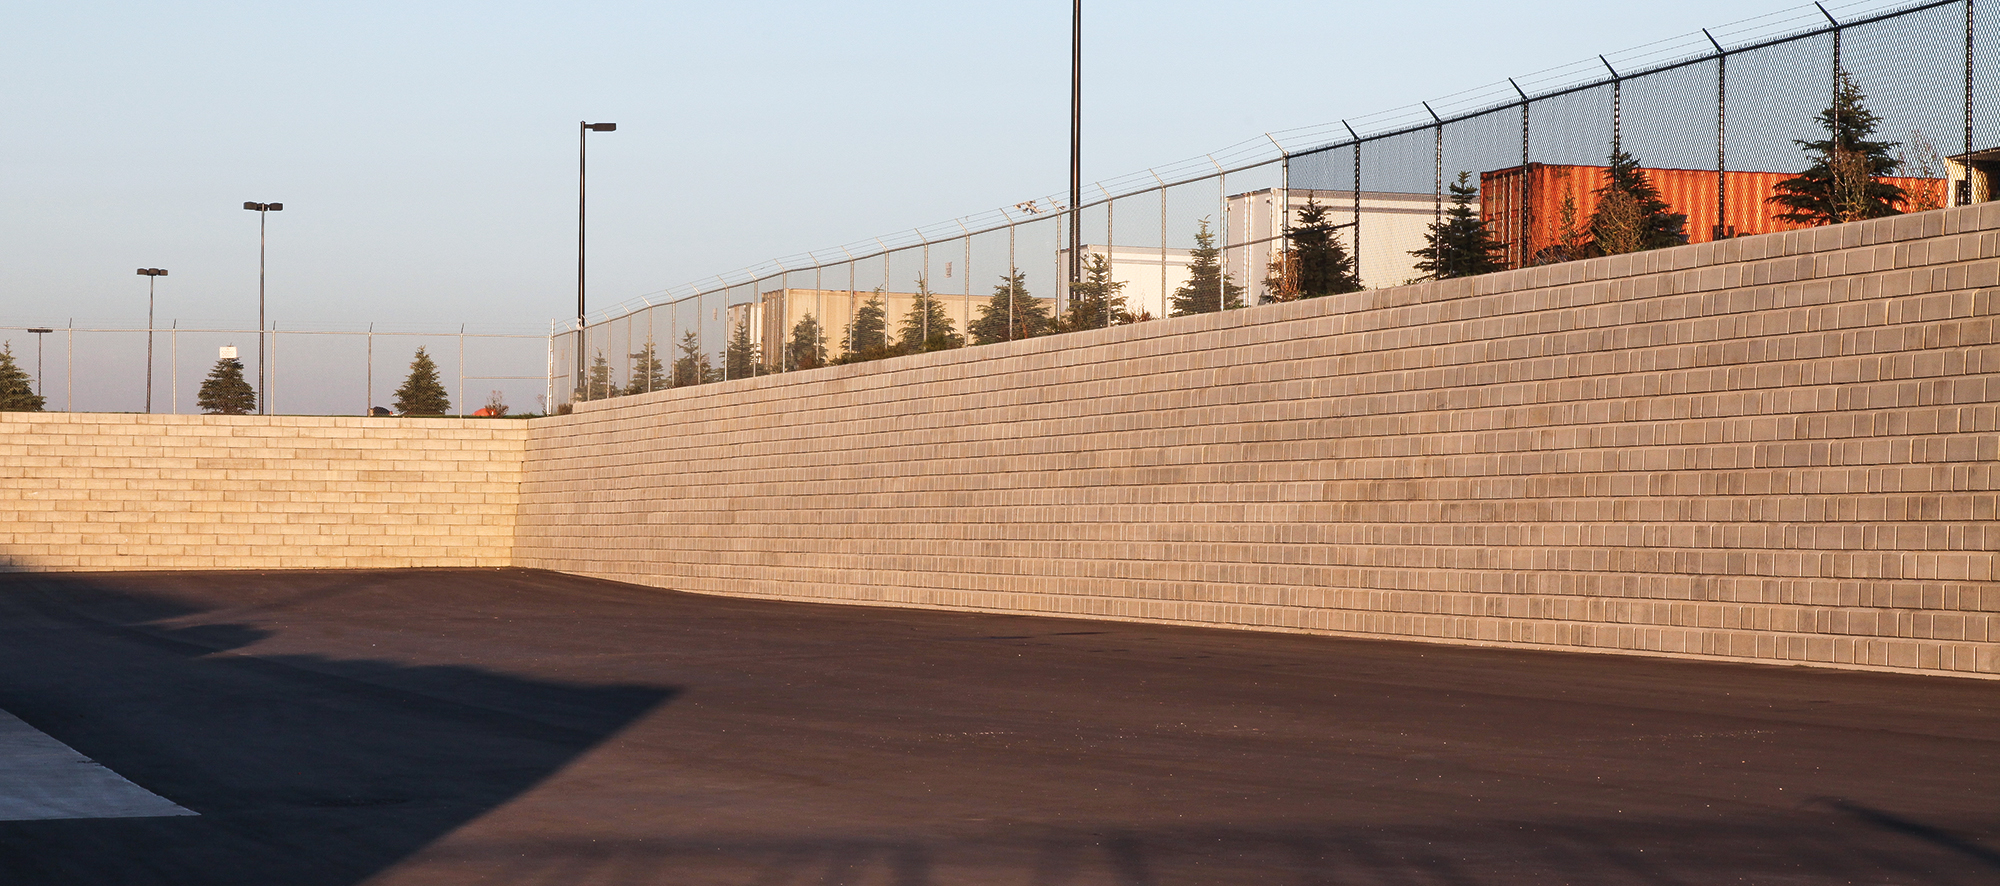 At the Home Depot Warehouse, a sizable DuraHold retaining wall and chain-link fence enclose an open parking area.